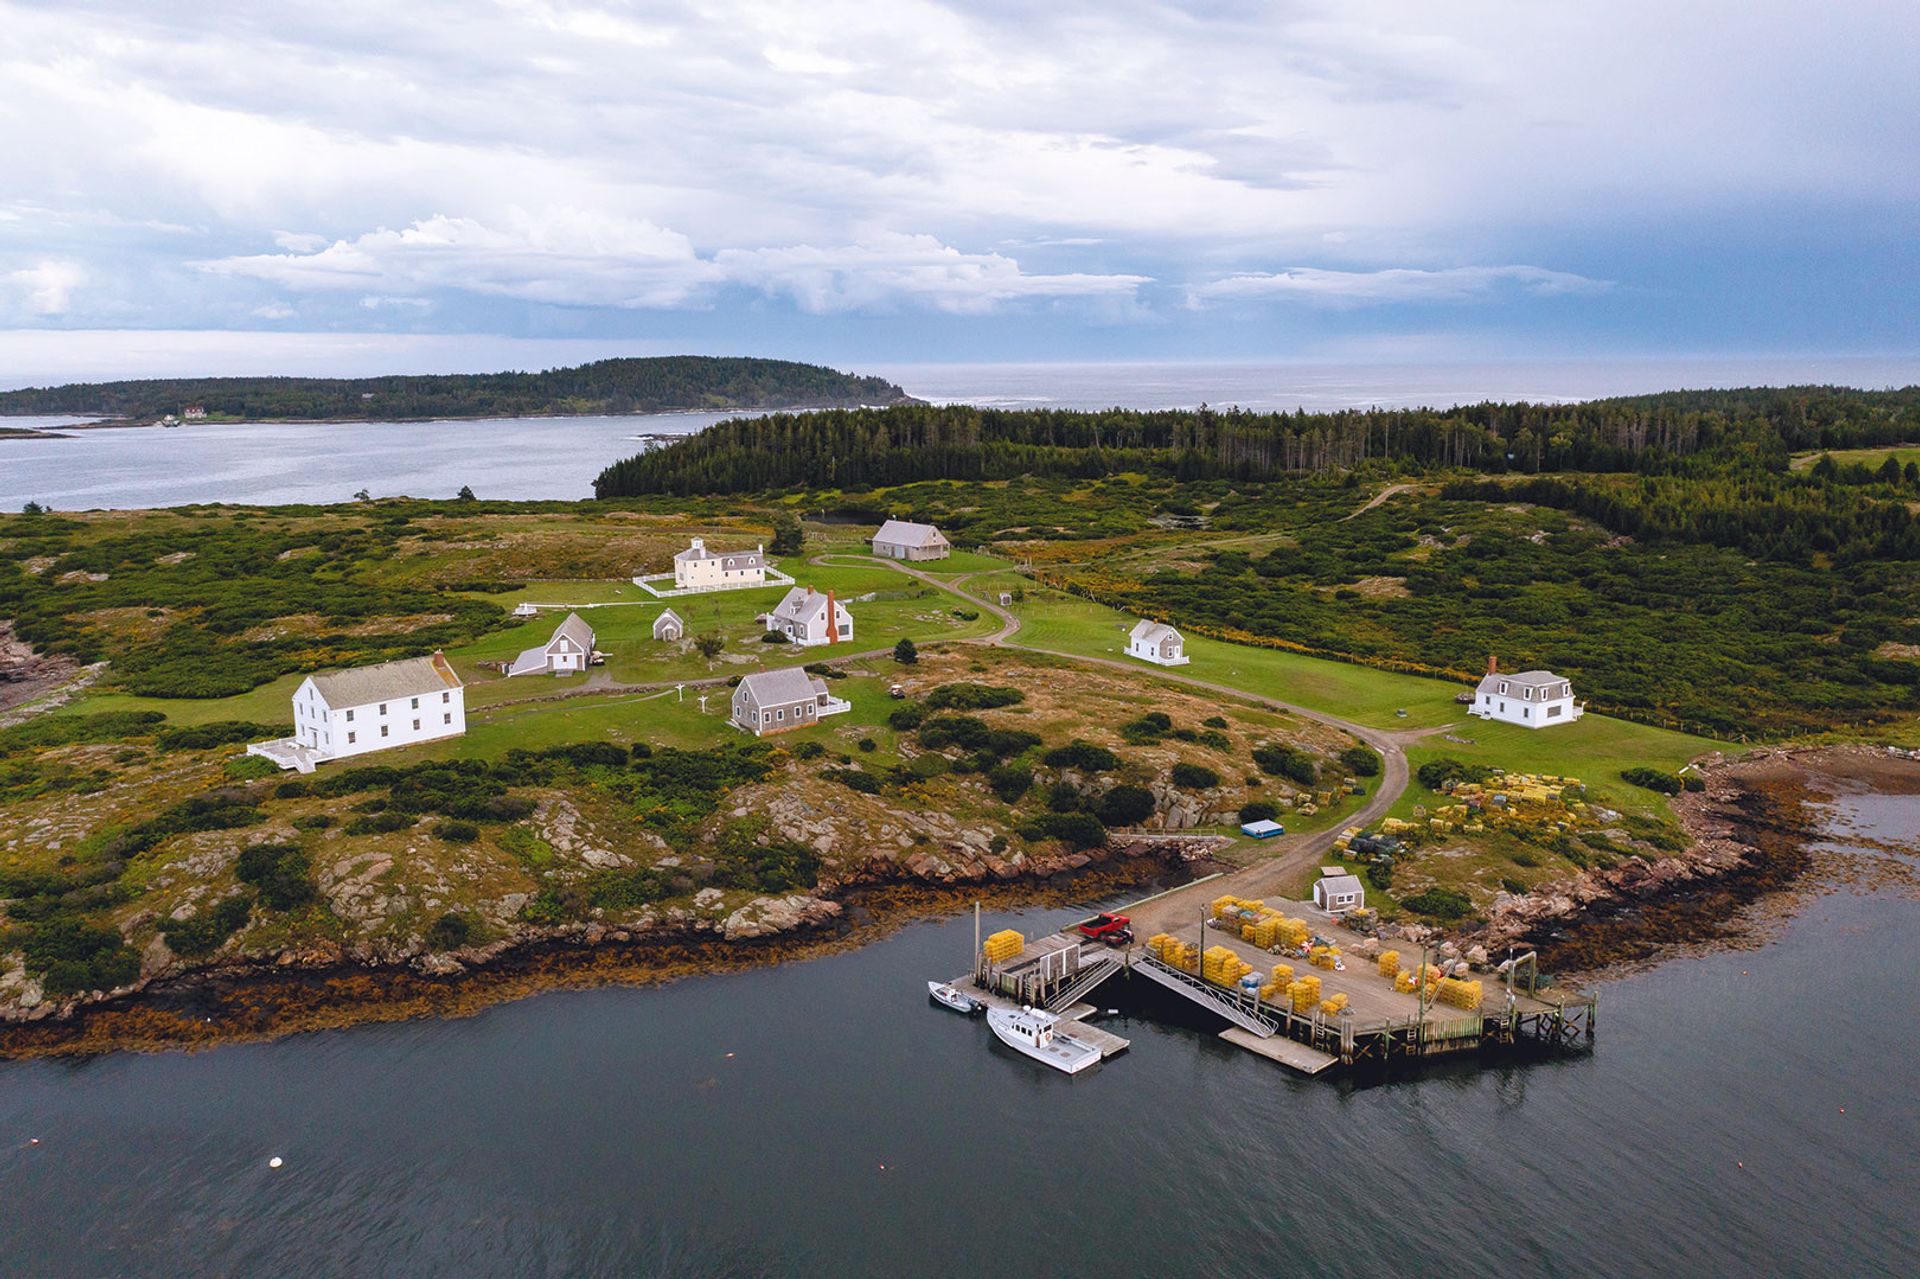 Allen Island in Maine is one of two islands once owned by the artist Andrew Wyeth and his wife Betsy. The Wyeth family sold the islands to Colby College, a liberal arts university Photo: Gabe Souza; © 2021 Colby College